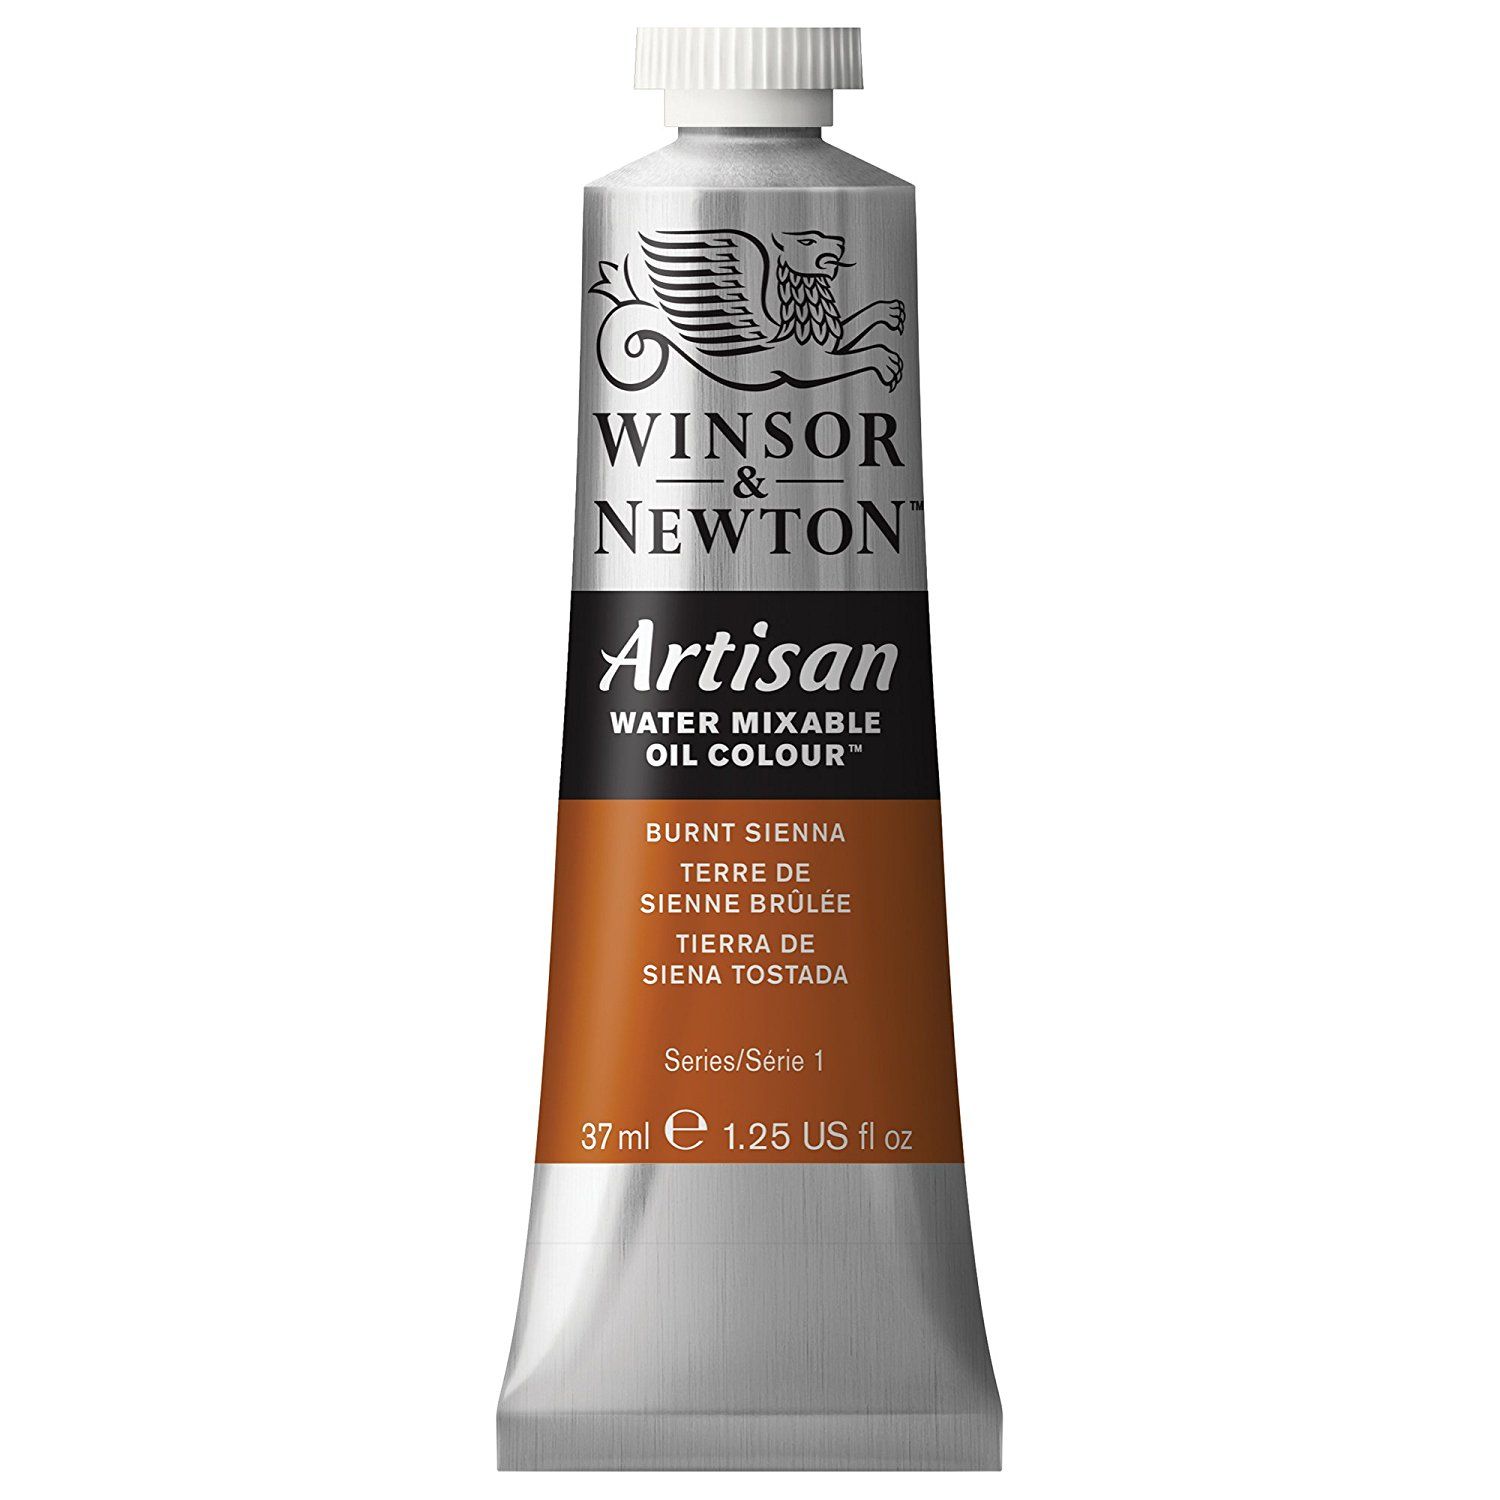 Artisan Water Mixable Oil - Burnt Sienna 37ml